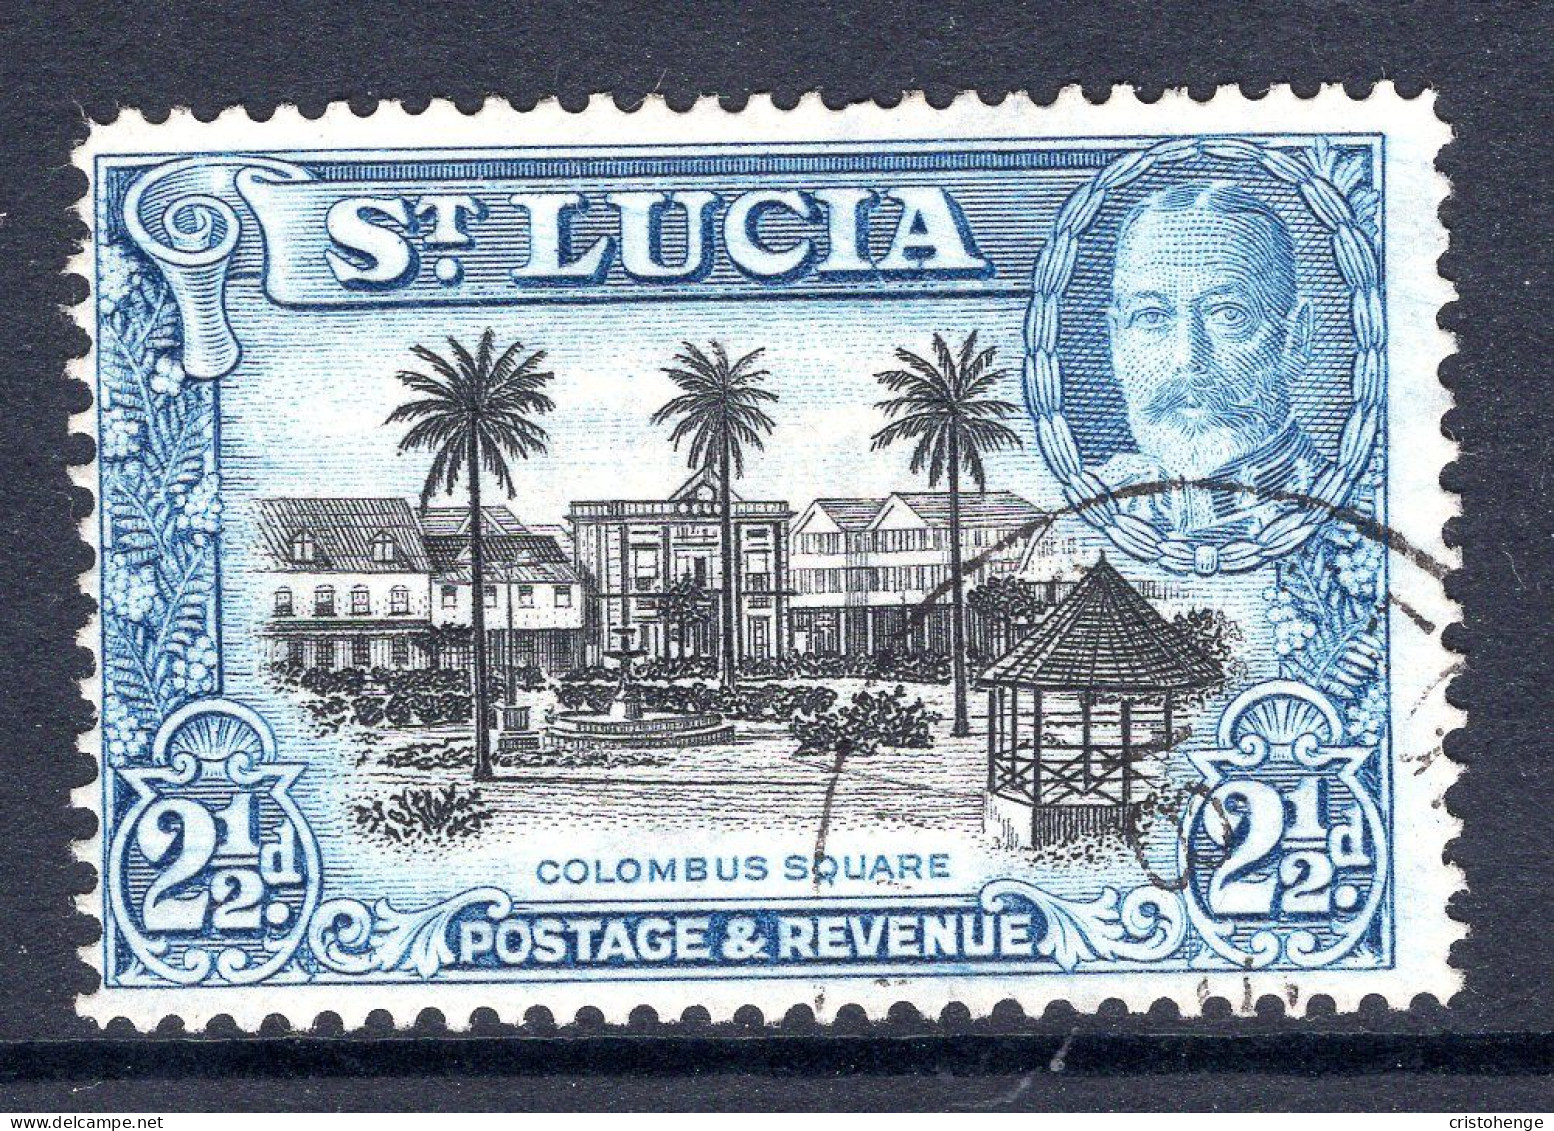 St Lucia 1936 KGV Pictorials - P.14 - 2½d Columbus Square Used (SG 117) - Ste Lucie (...-1978)